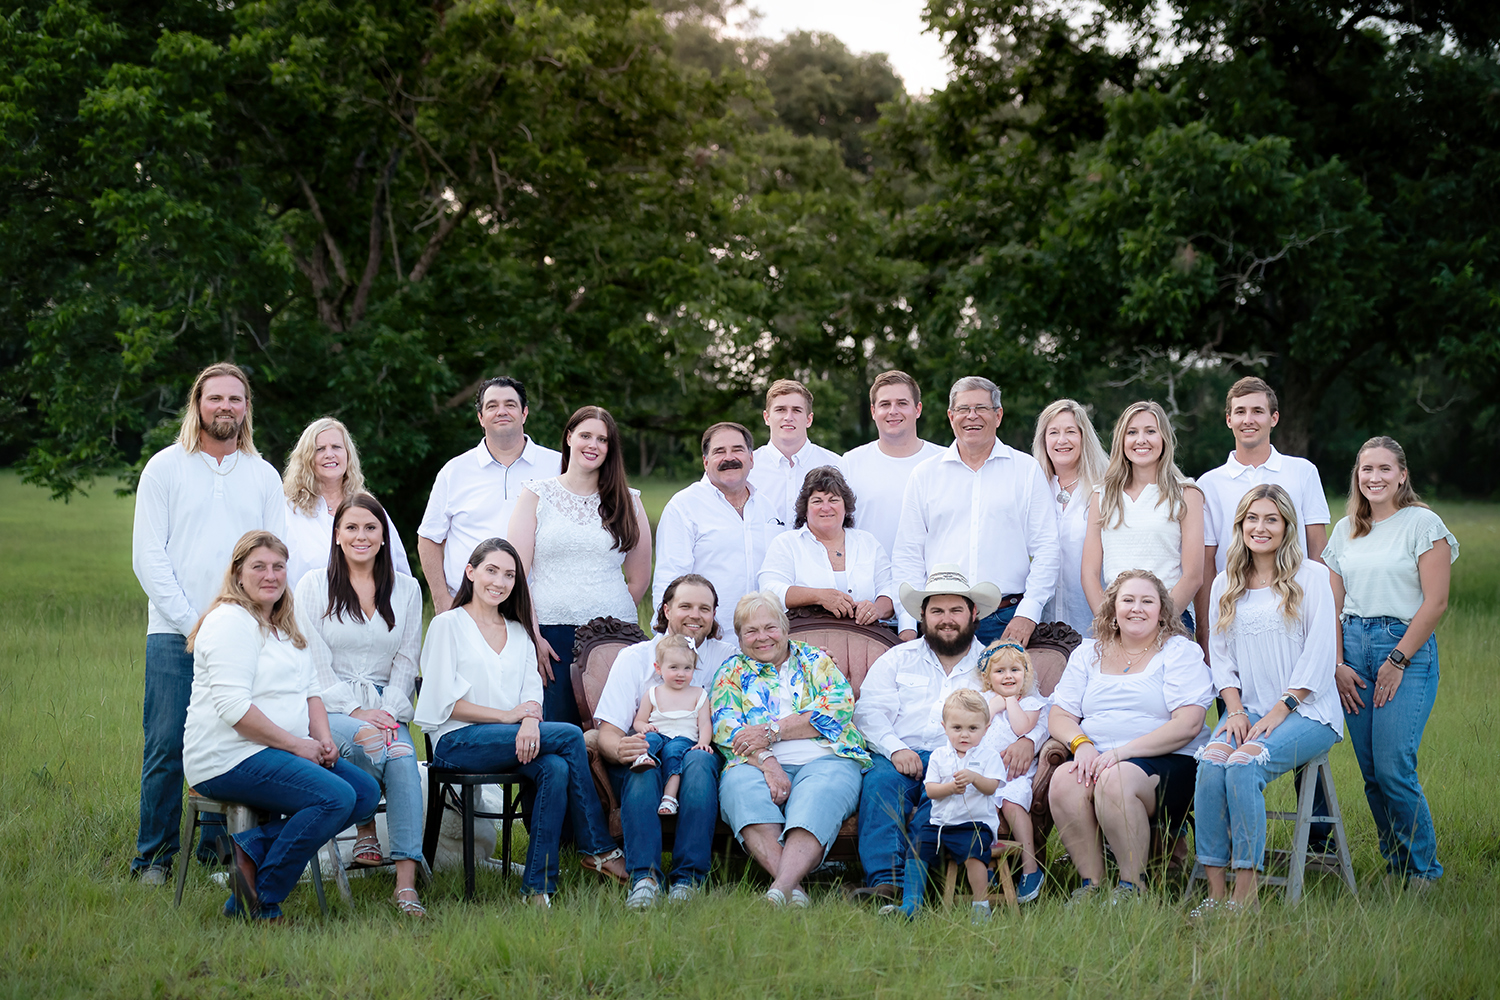 Large Family Portrait by Lisa Rowland at Perfect-photos.com